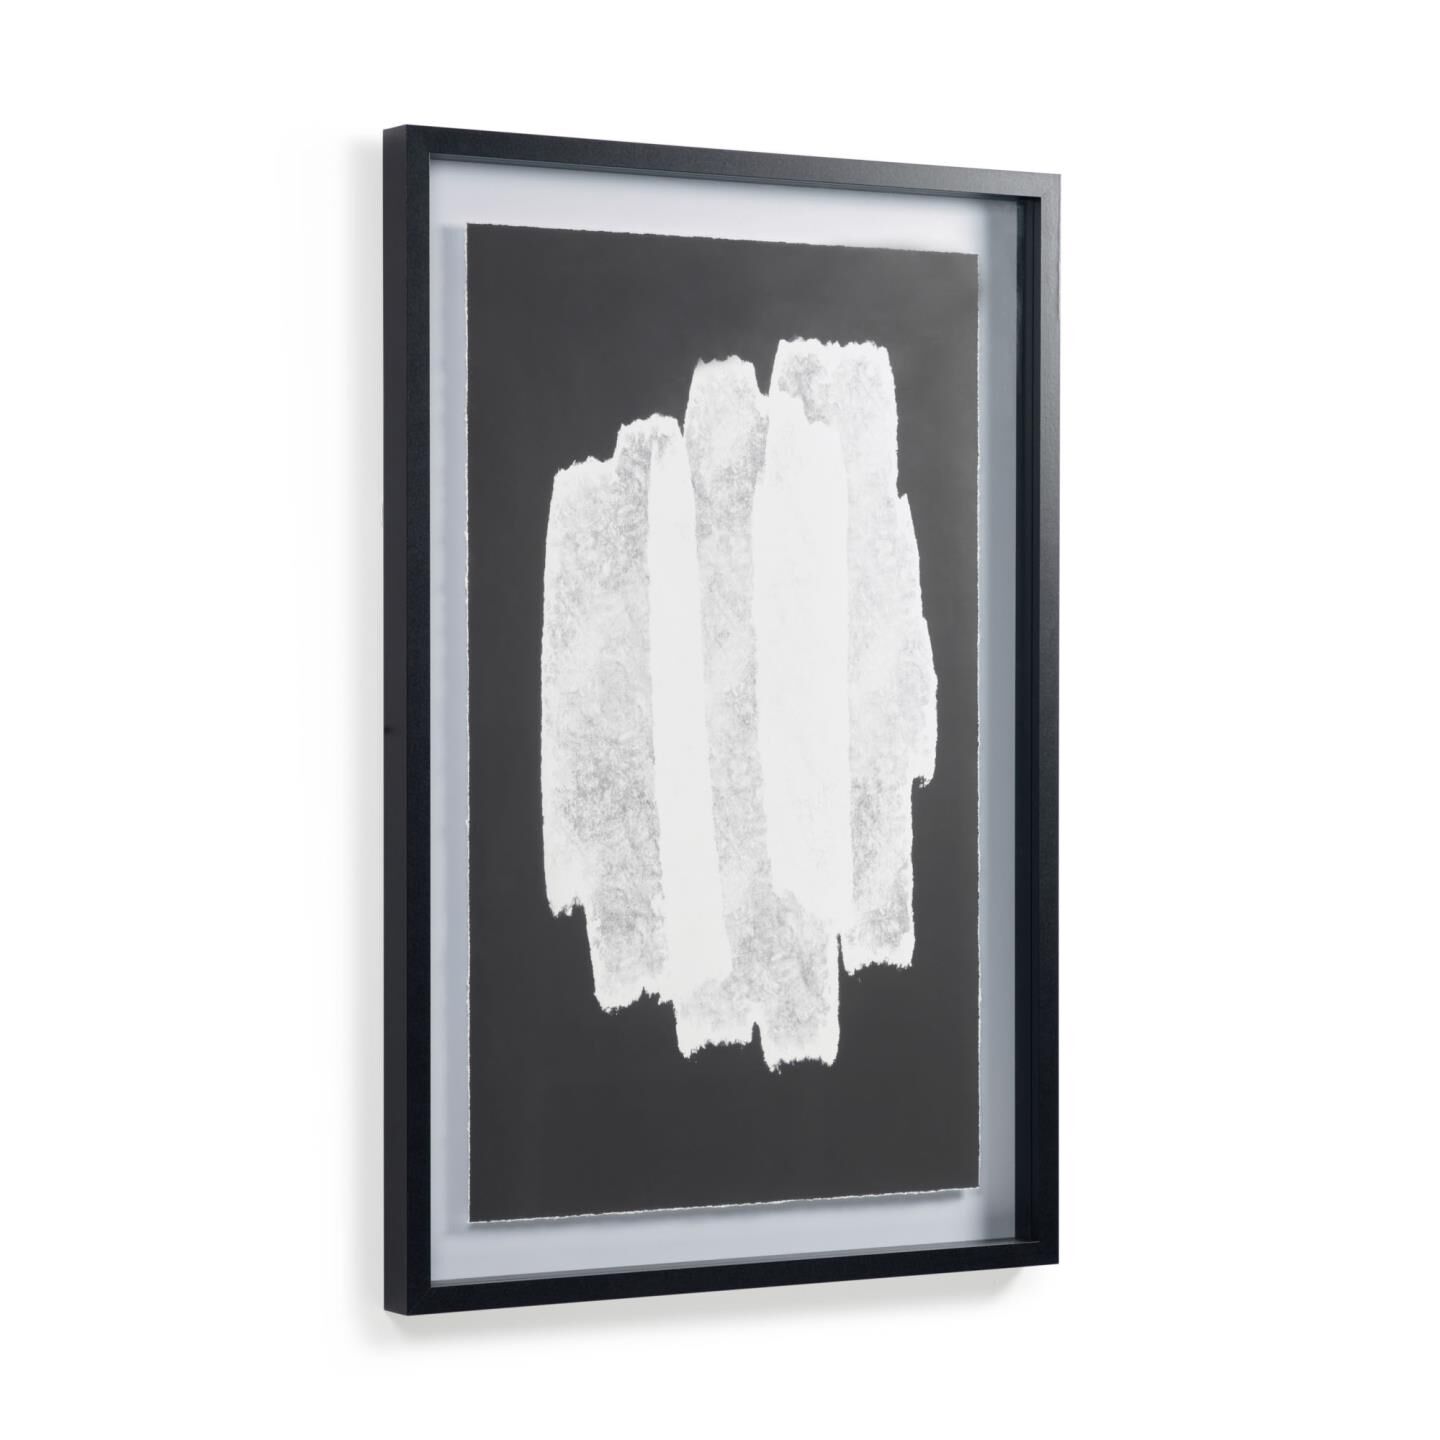 Kave Home Moad picture in black and white 60 x 90 cm